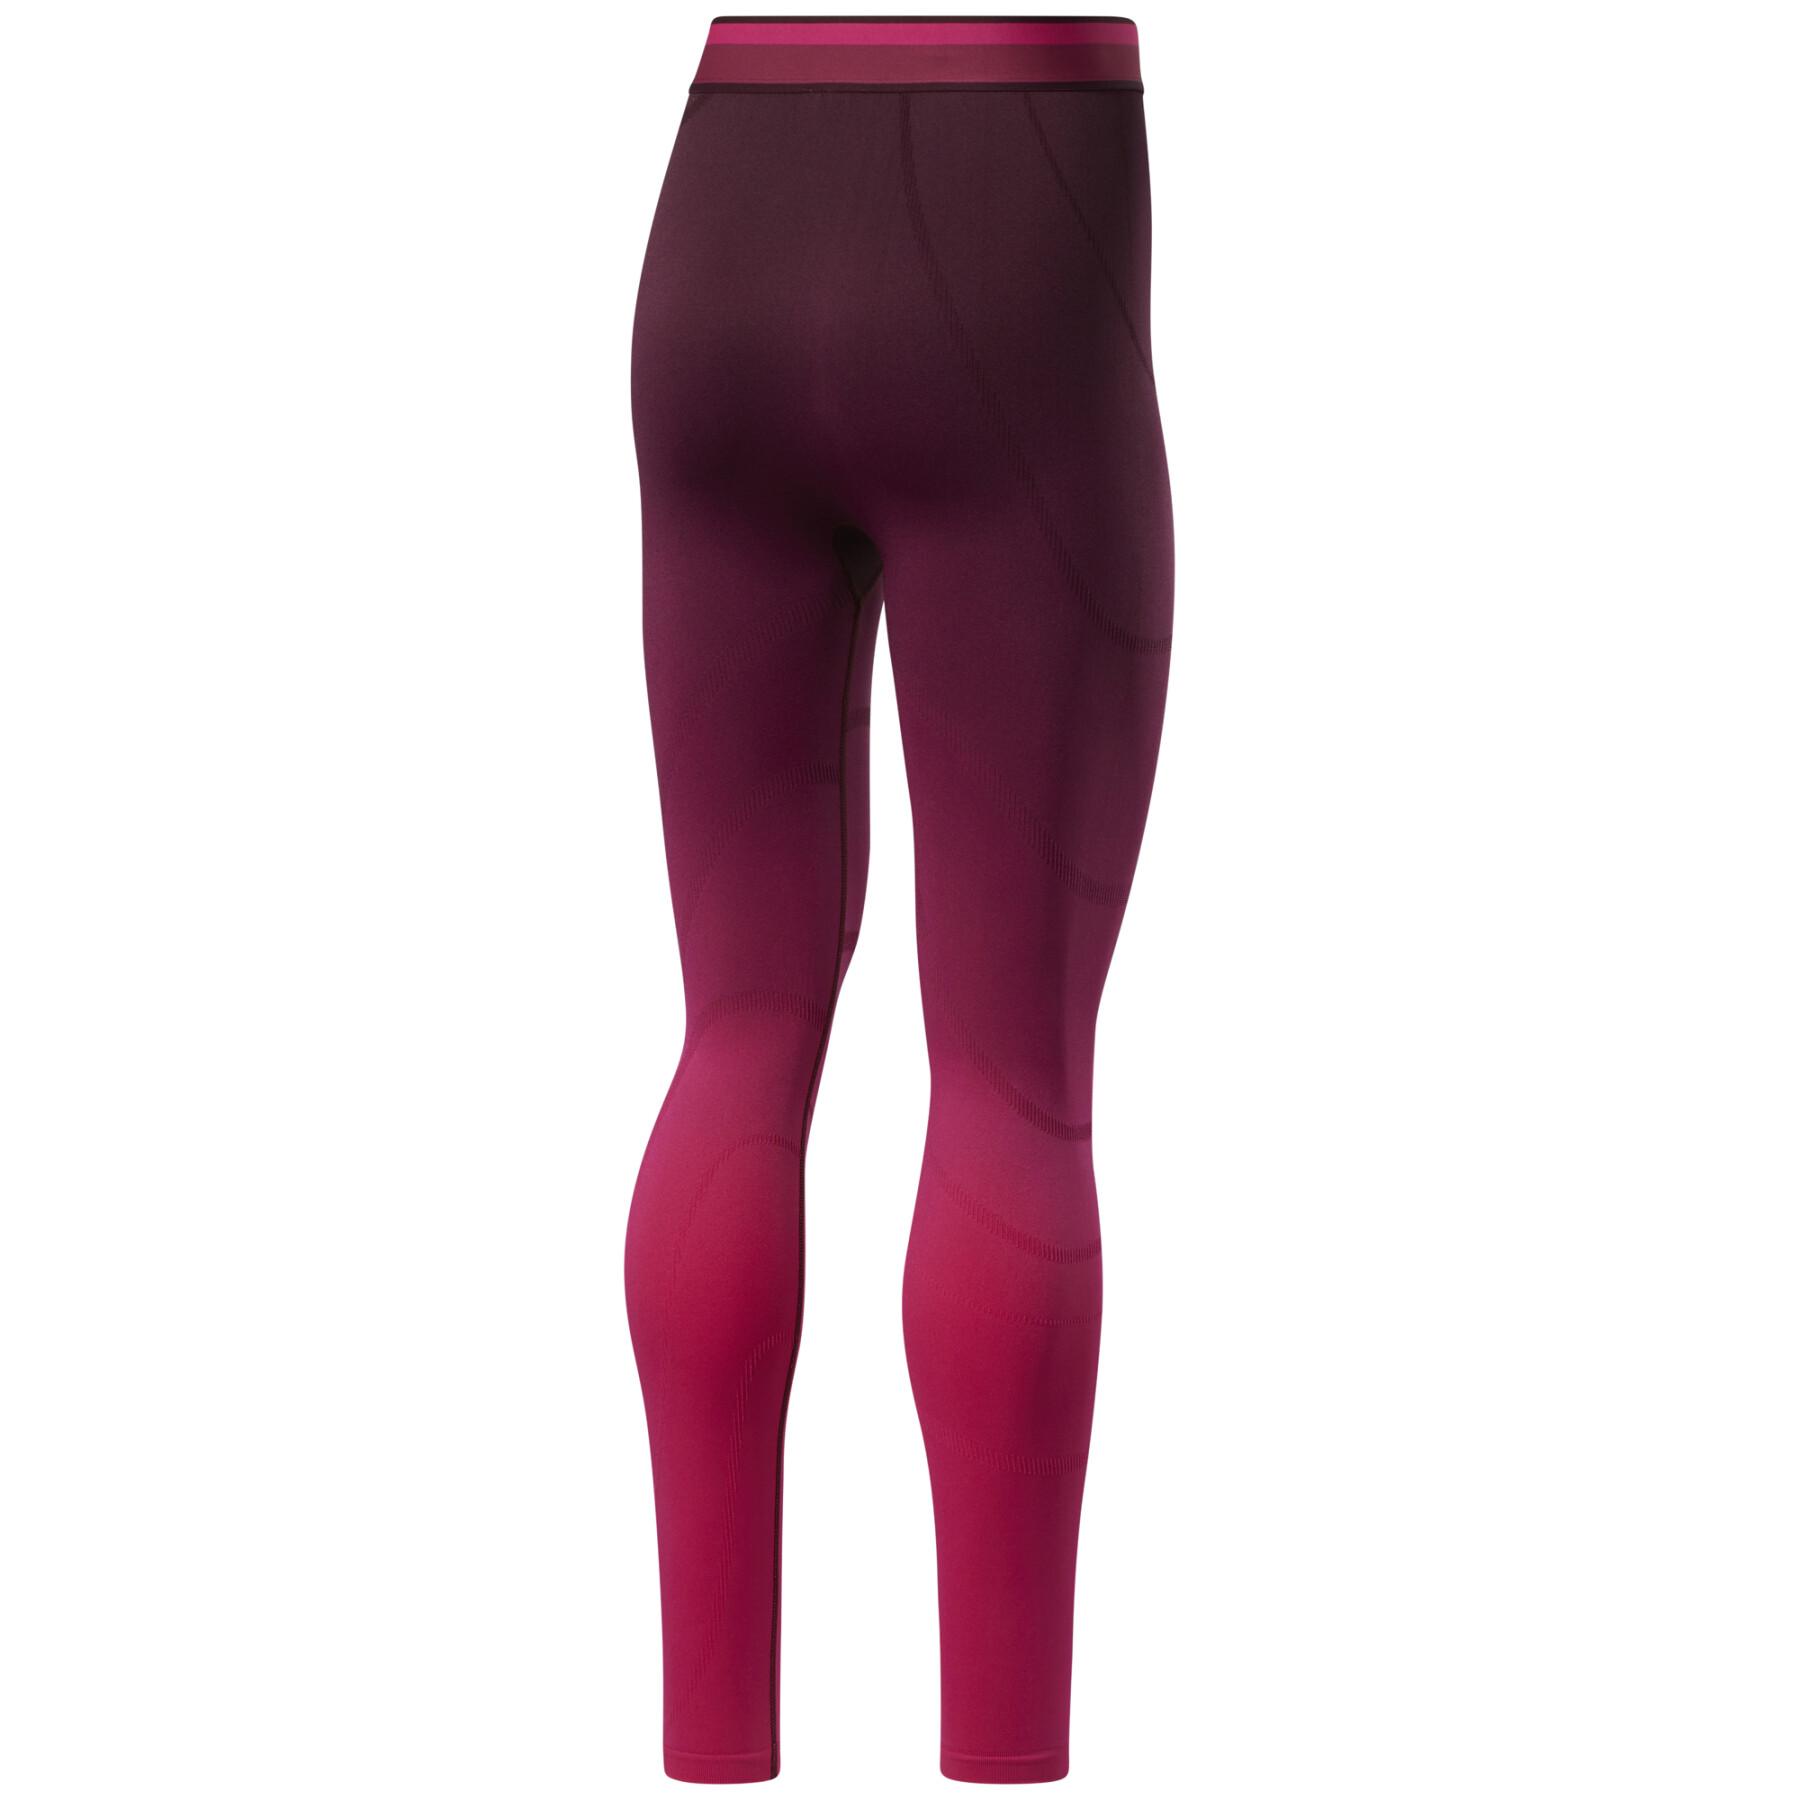 Damen-Leggings mit hoher Taille Reebok United by Fitness